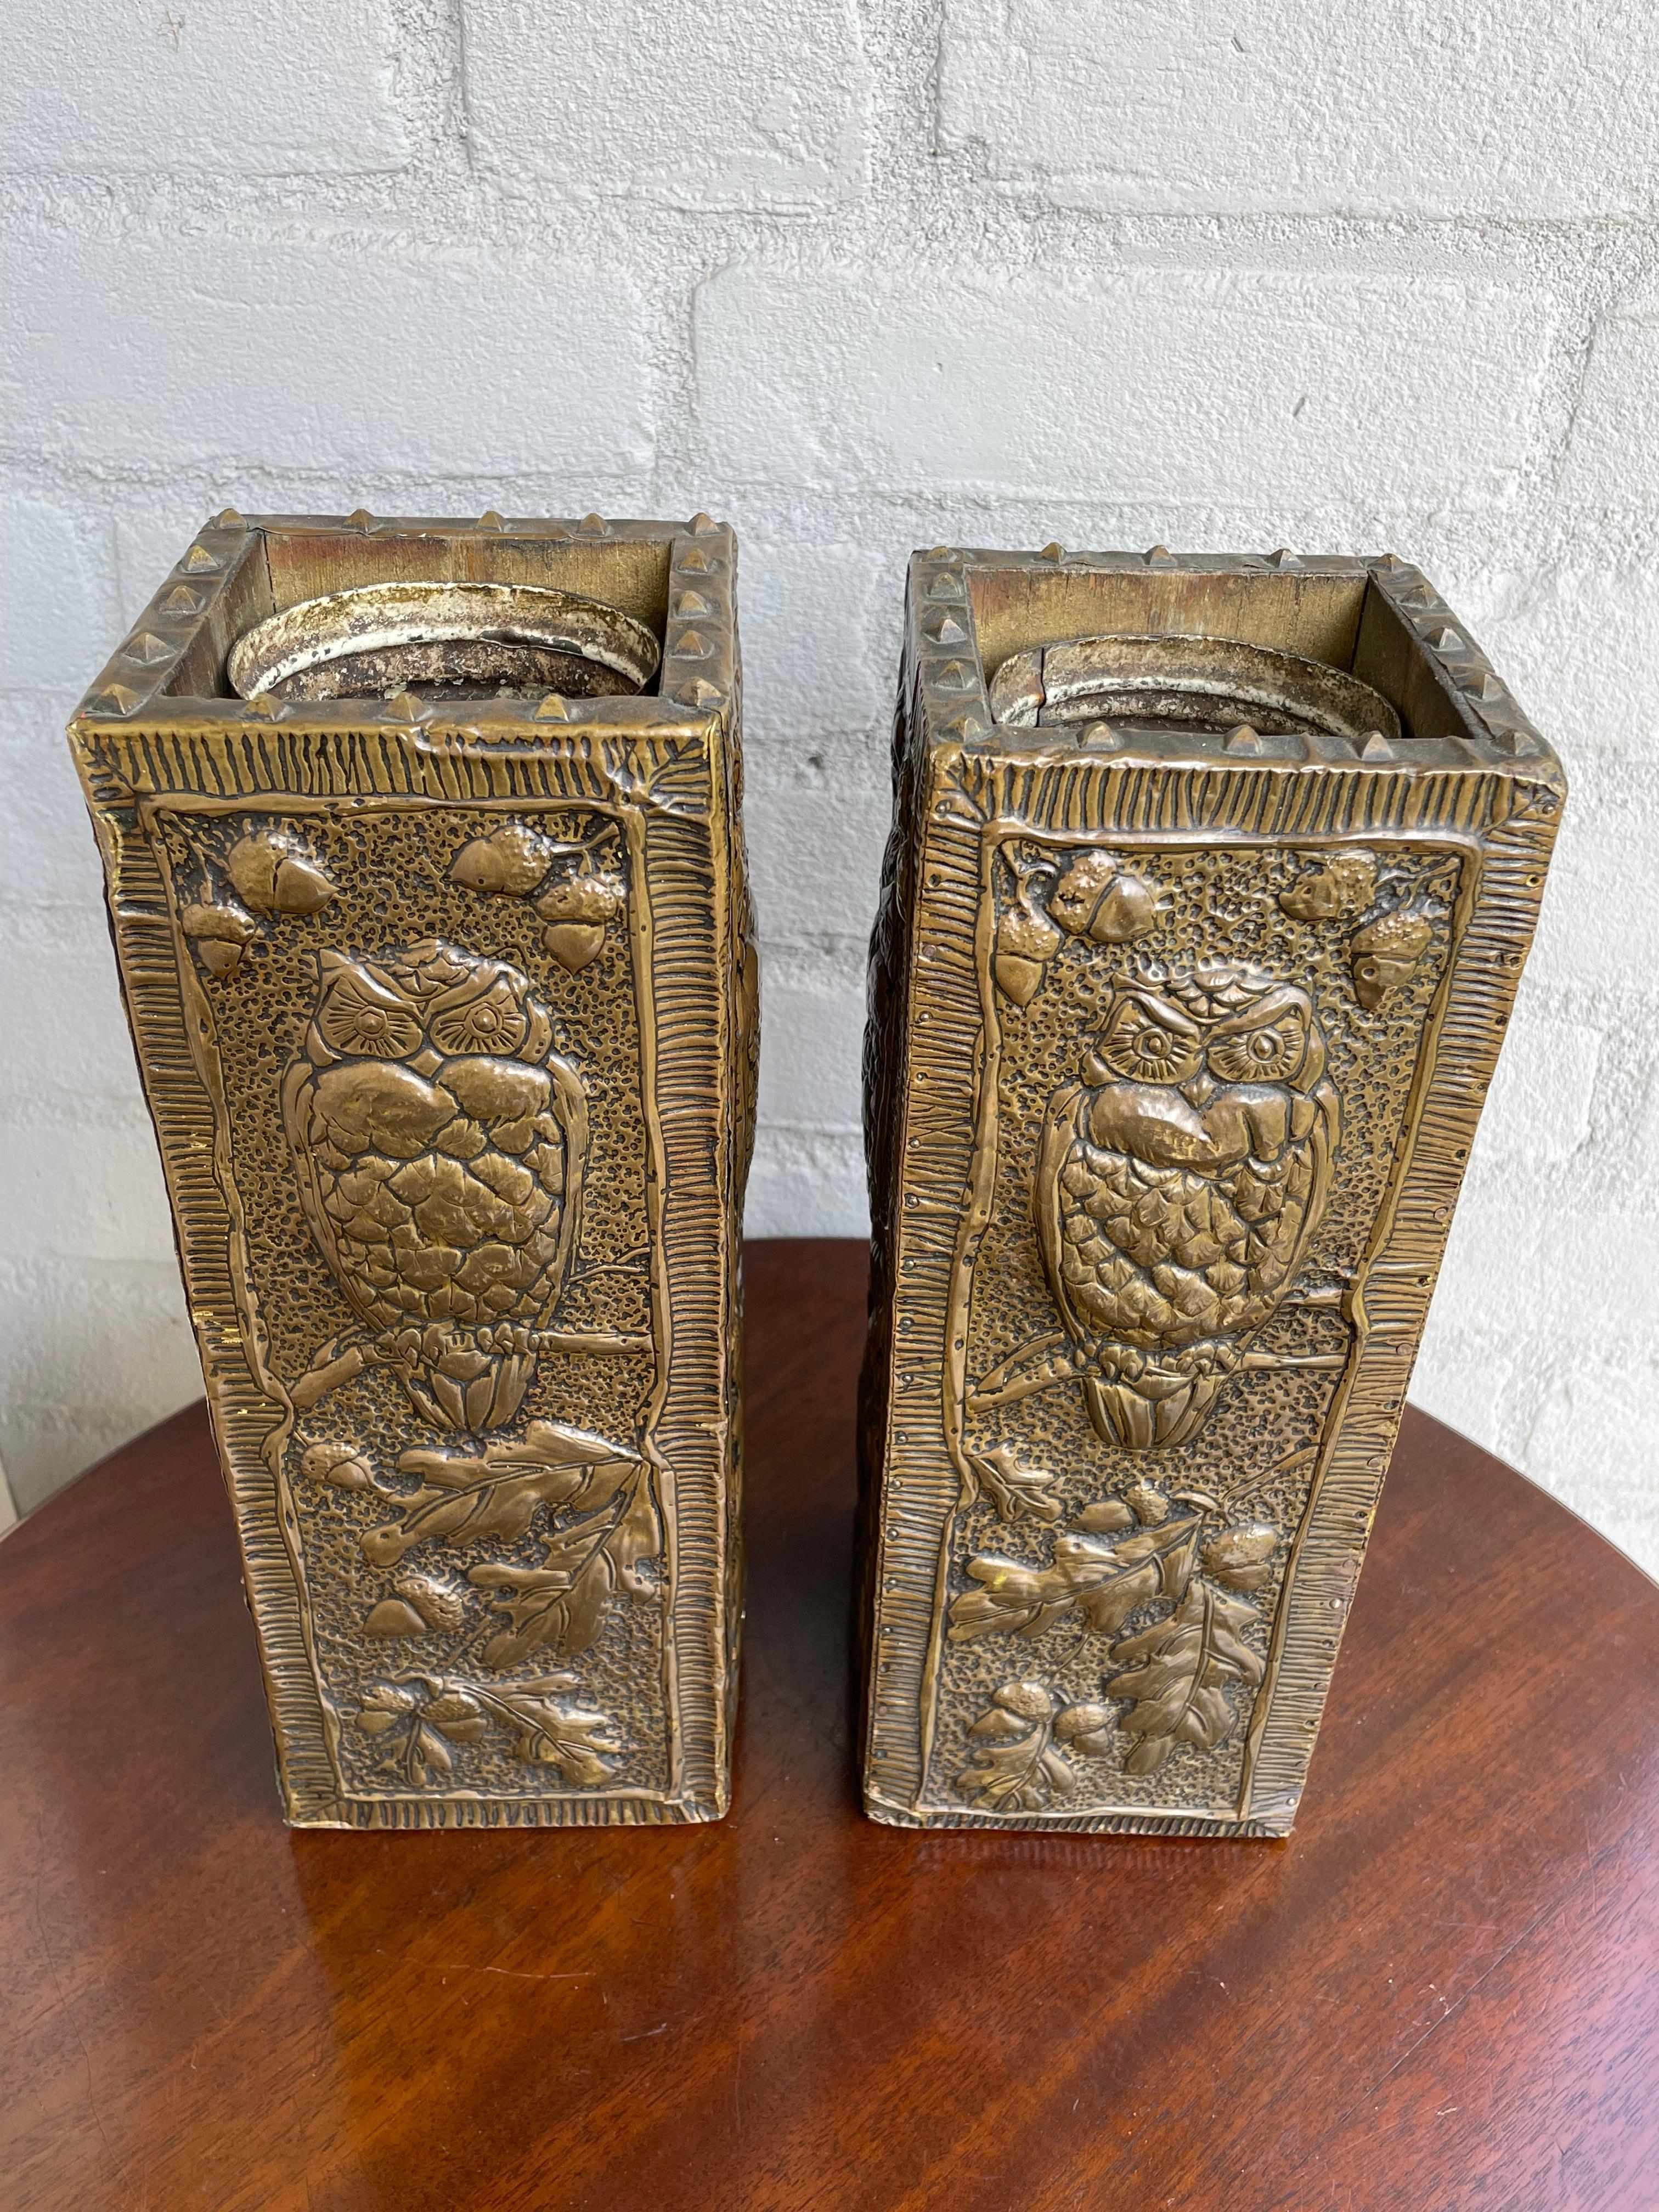 20th Century Antique and Unique Arts & Crafts Pair of Embossed Brass Vases w. Owl Sculptures For Sale